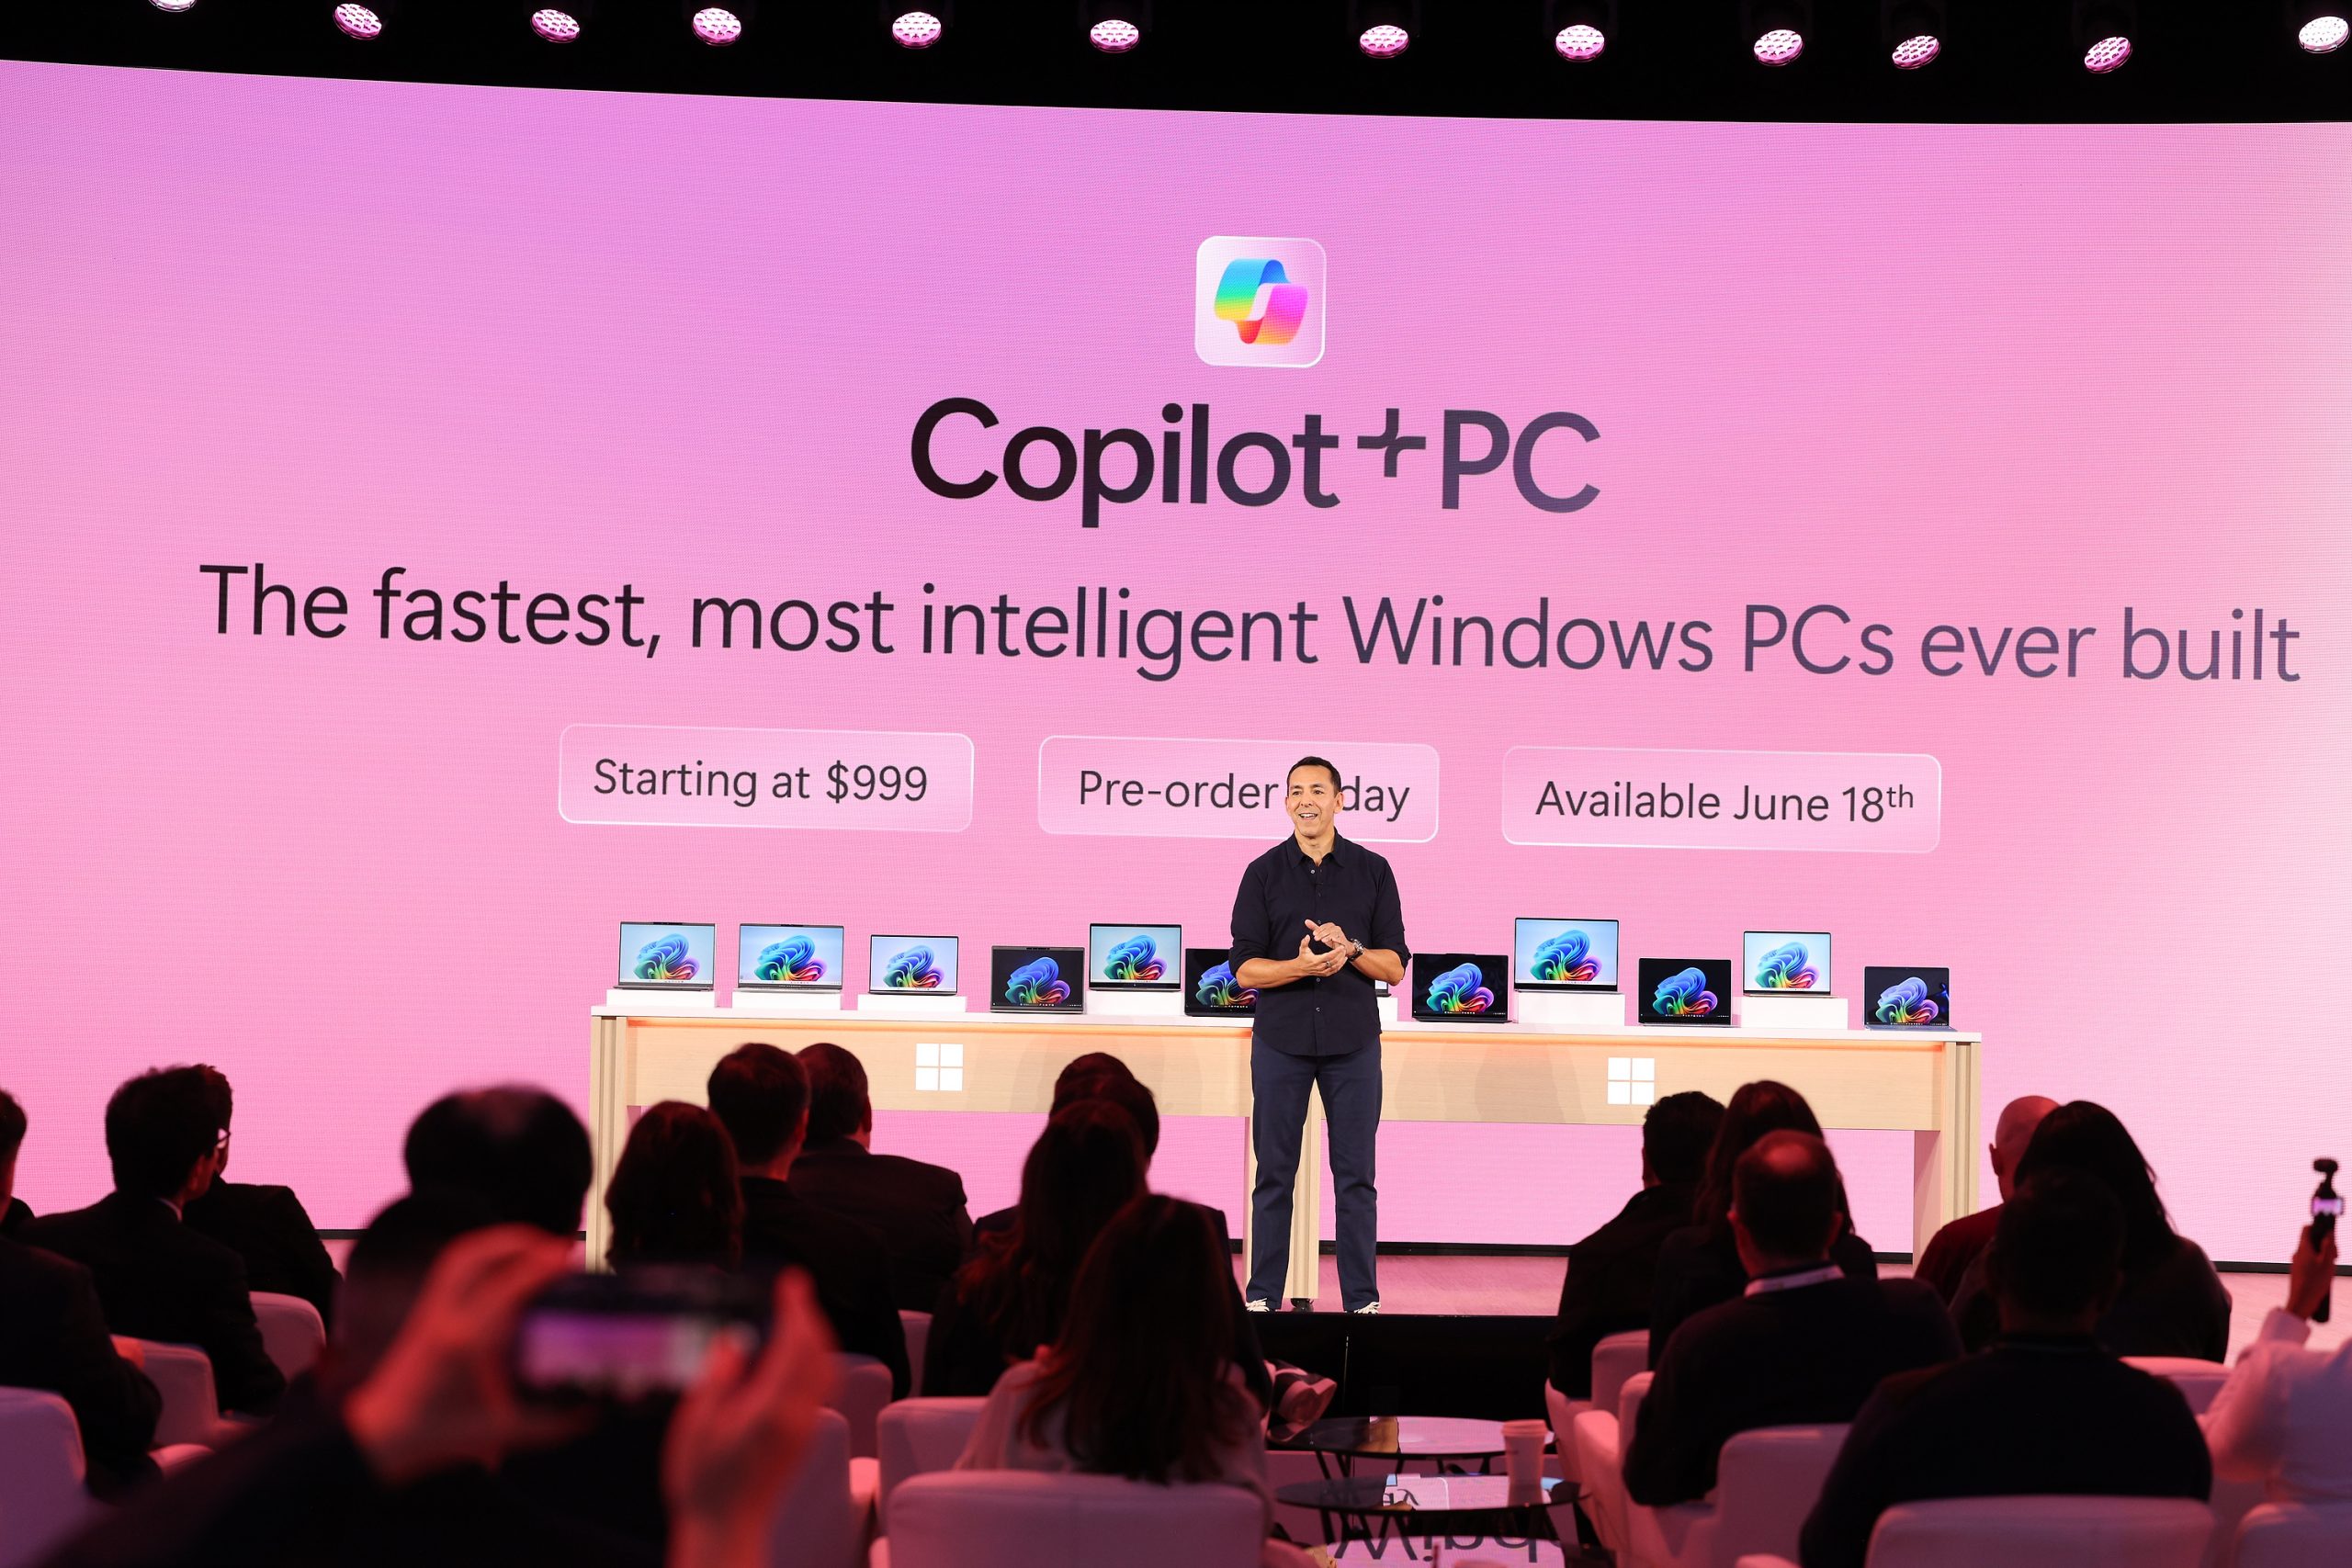 A man standing on stage in front of an audience with a display of Copilot+ PC laptops behind him